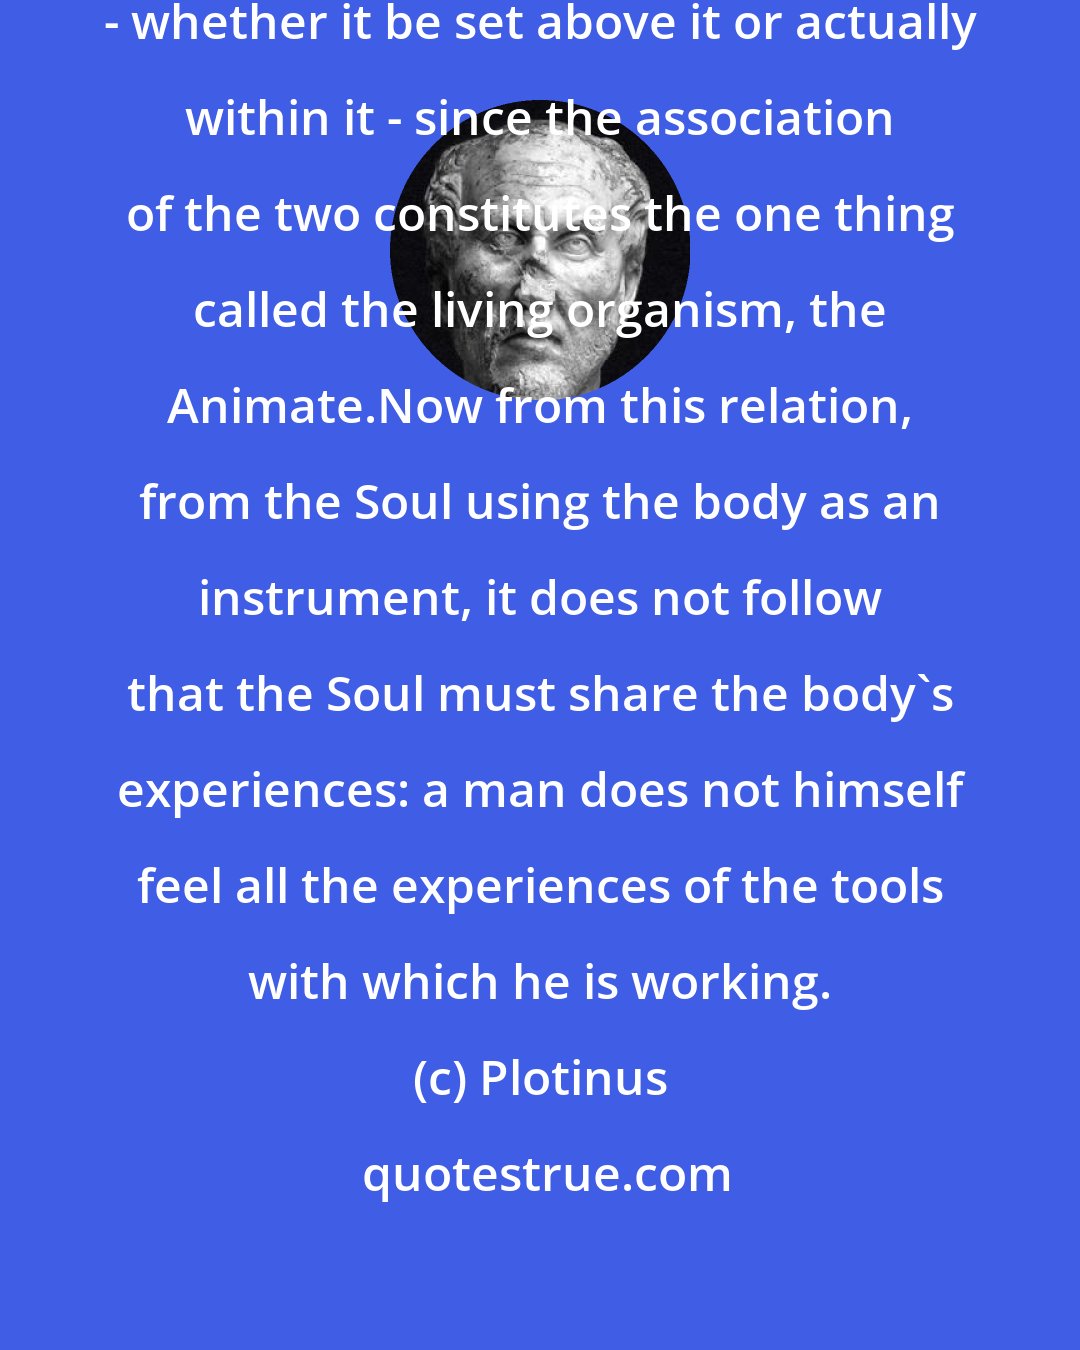 Plotinus: We may treat of the Soul as in the body - whether it be set above it or actually within it - since the association of the two constitutes the one thing called the living organism, the Animate.Now from this relation, from the Soul using the body as an instrument, it does not follow that the Soul must share the body's experiences: a man does not himself feel all the experiences of the tools with which he is working.